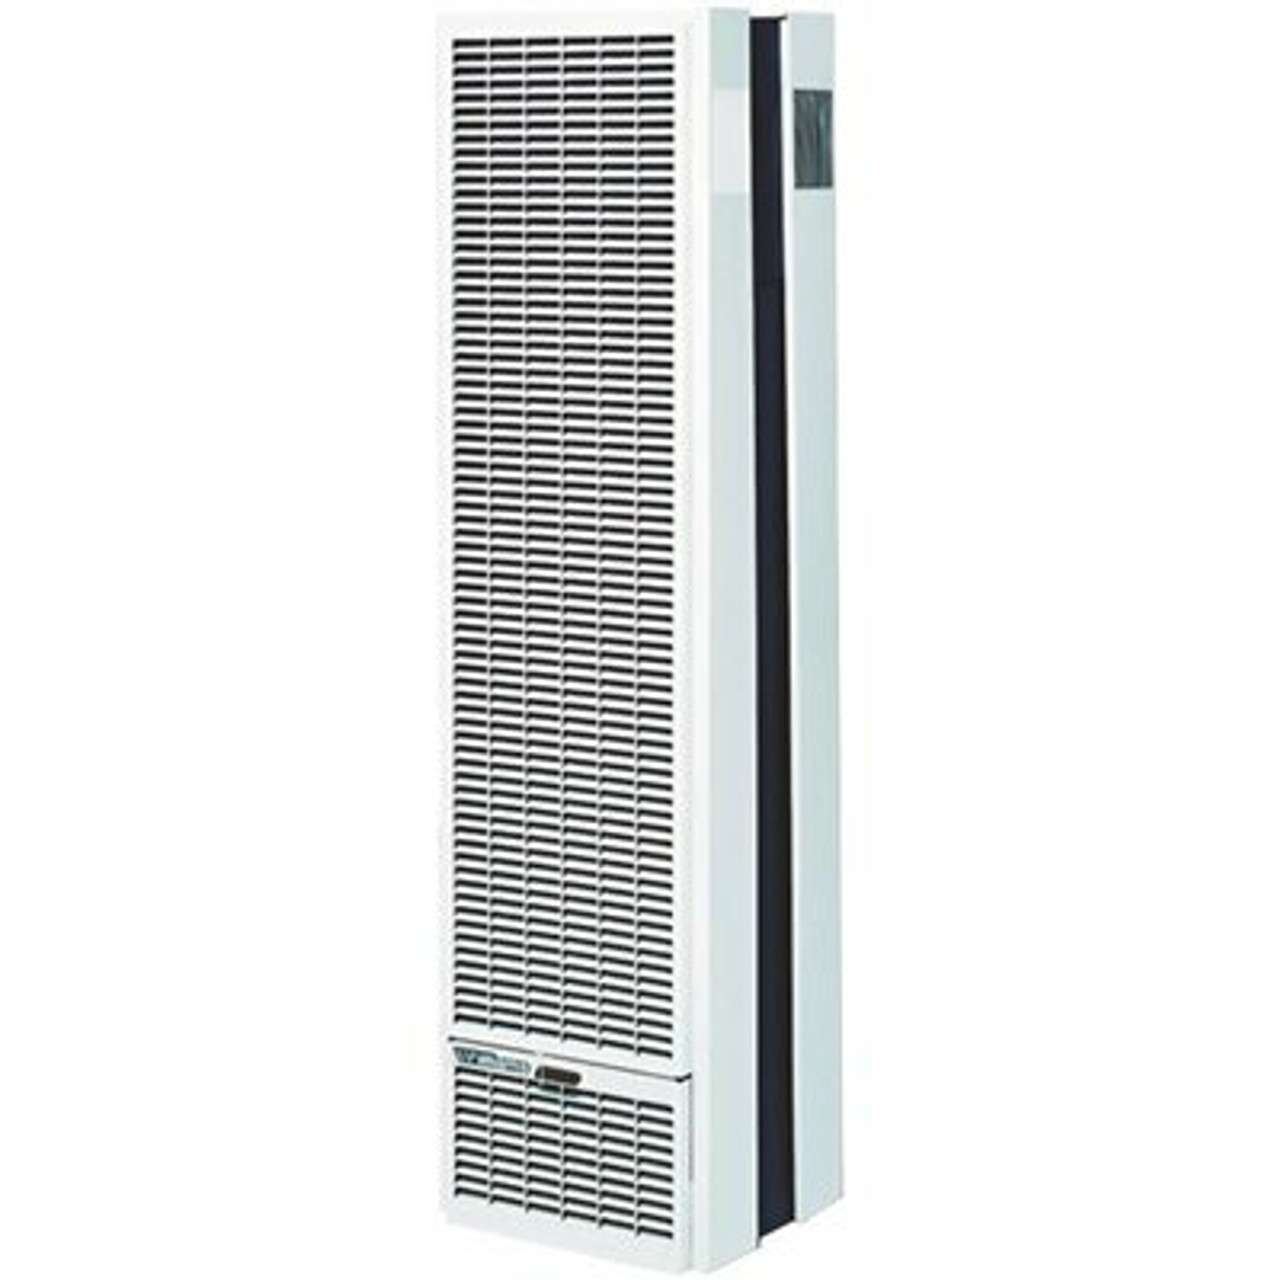 Williams Monterey Top-Vent Wall Heater 50,000 Btuh, 70% Afue, Natural Gas